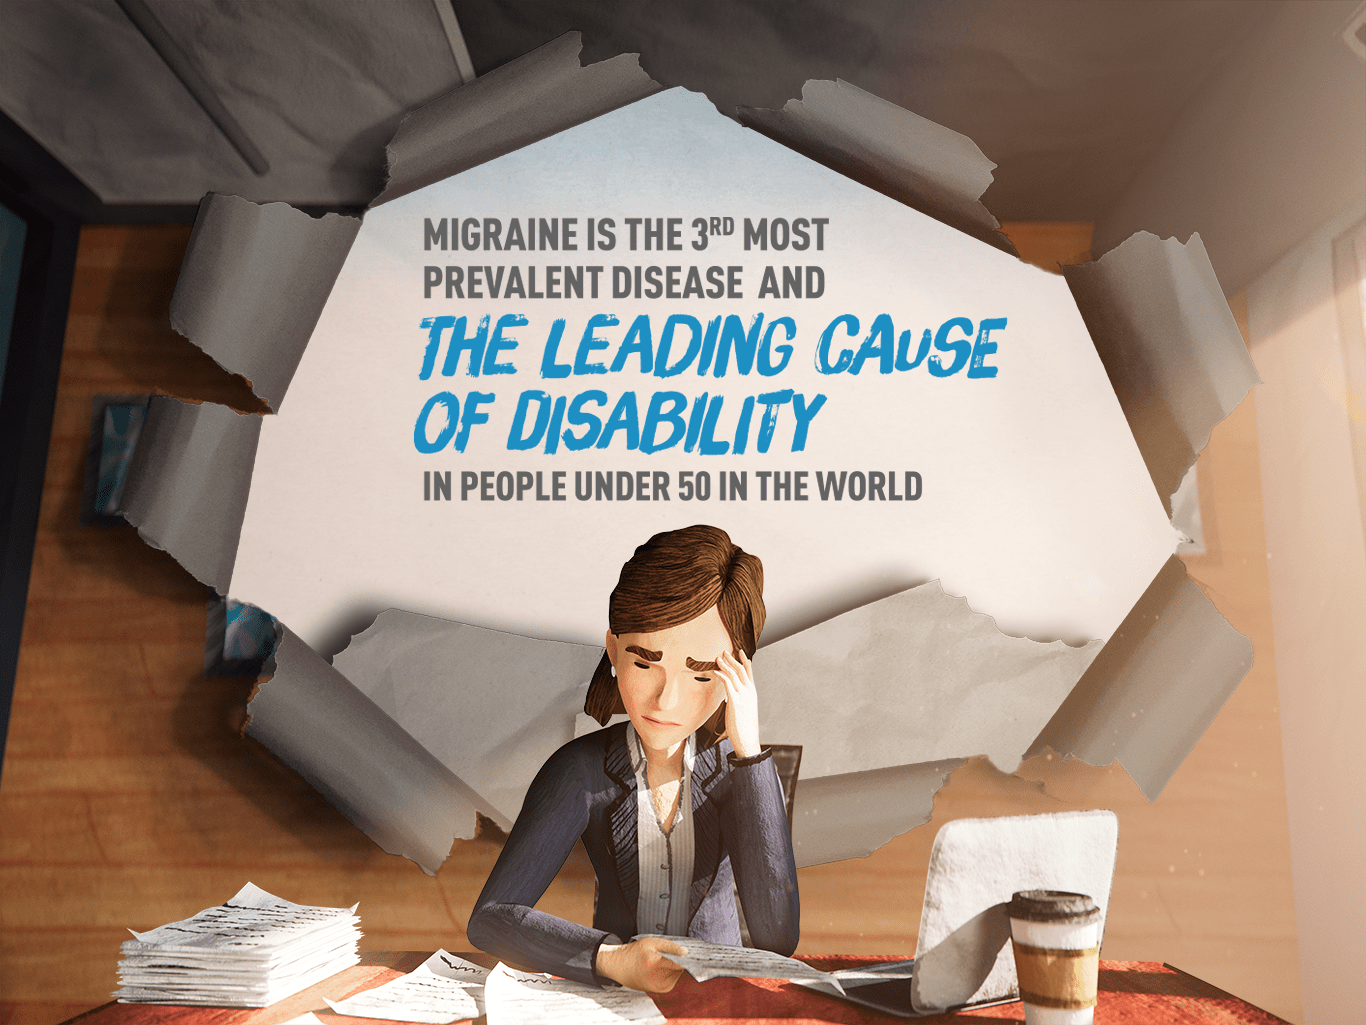 Migraine is the 3rd most prevalent disease and the leading cause of disability in people under 50 in the world